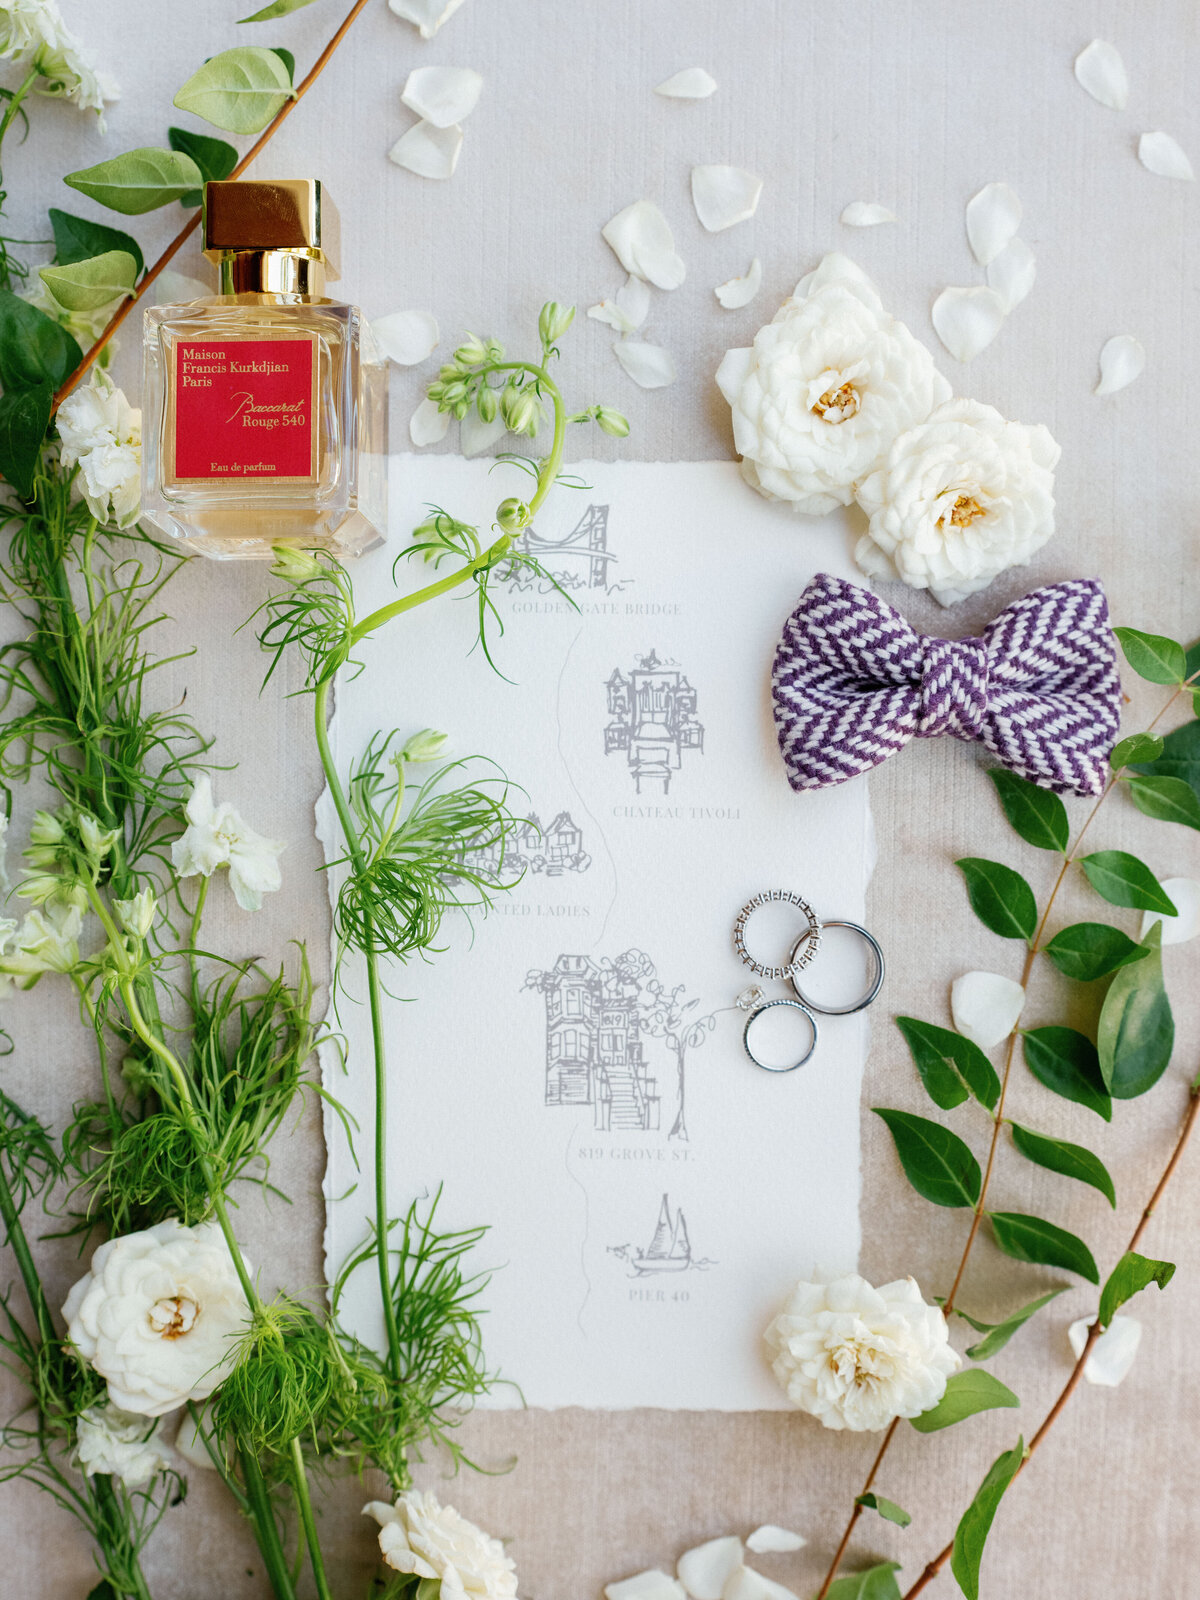 loose leaves and flowers tossed with a custom  wedding stationery and bride's personal details at an exclusive destination wedding in san francisco